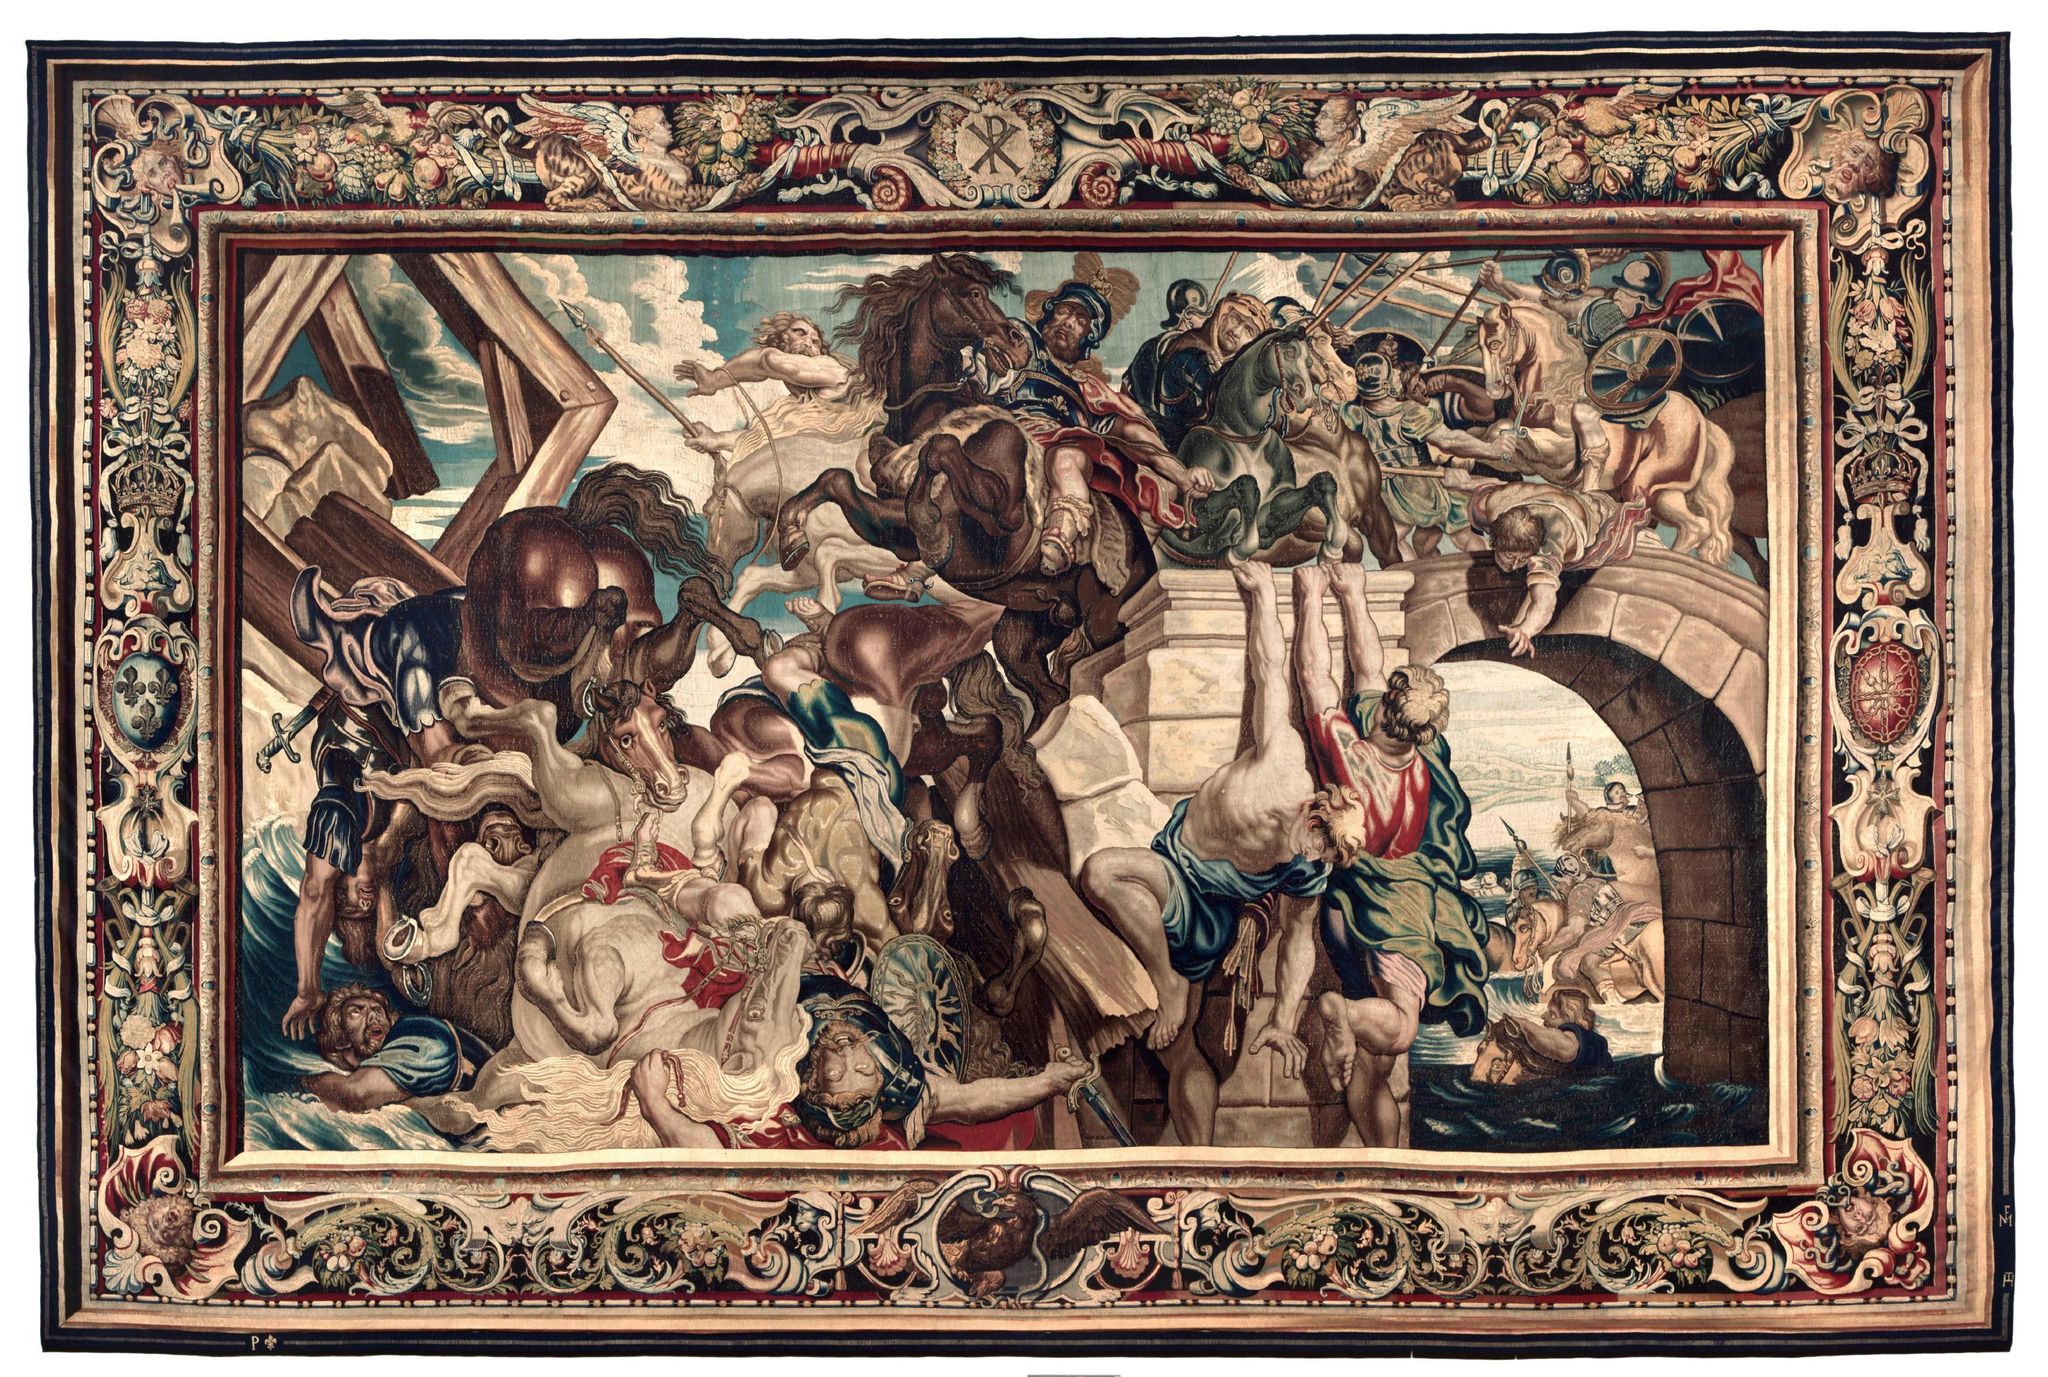 Tapestry showing the Triumph of Constantine over Maxentius at the Battle of the Milvian Bridge